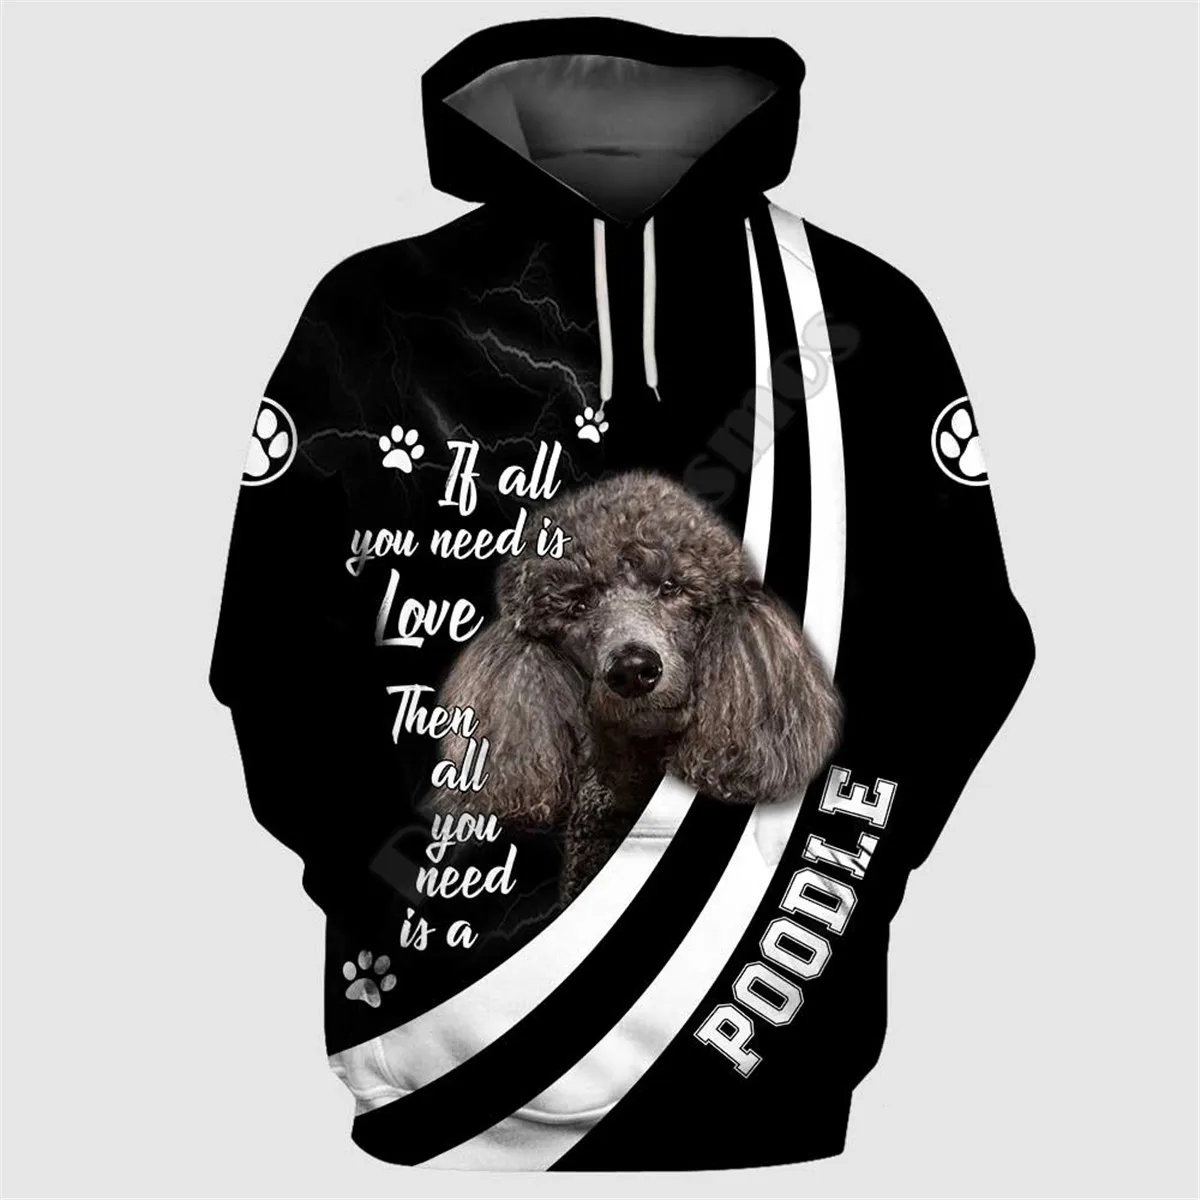 Poodle 3D Printed Hoodies Funny Pullover Men For Women Funny Sweatshirts Animal Sweater Drop Shipping 09